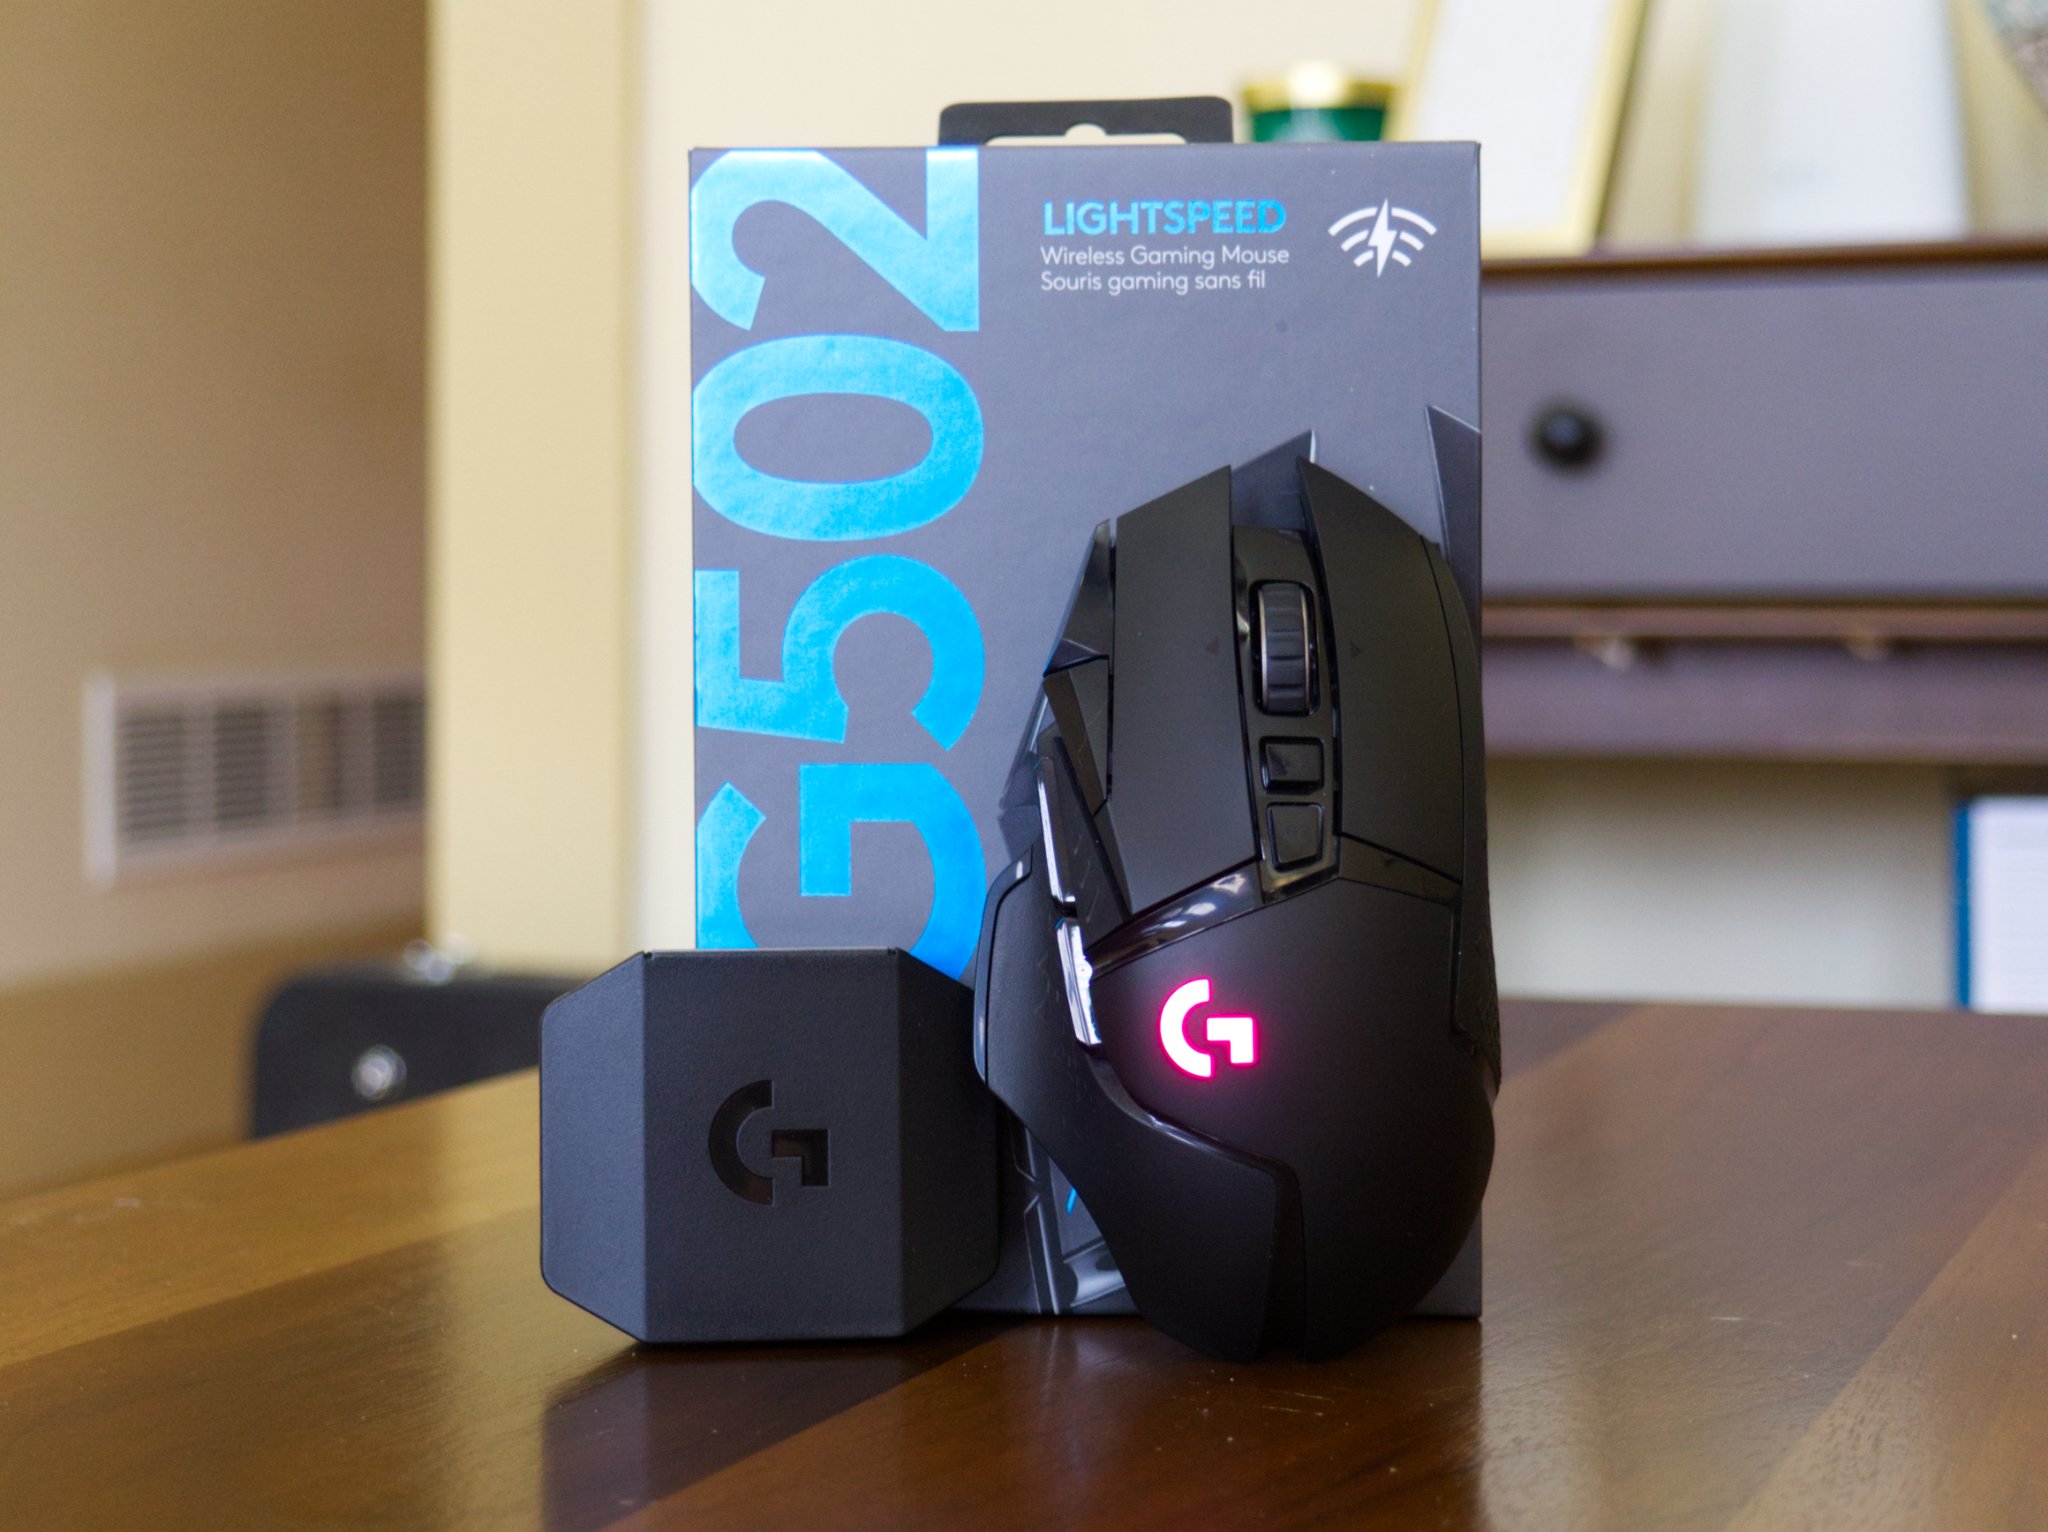 Logitech G502 Lightspeed review: A wireless gaming mouse that's